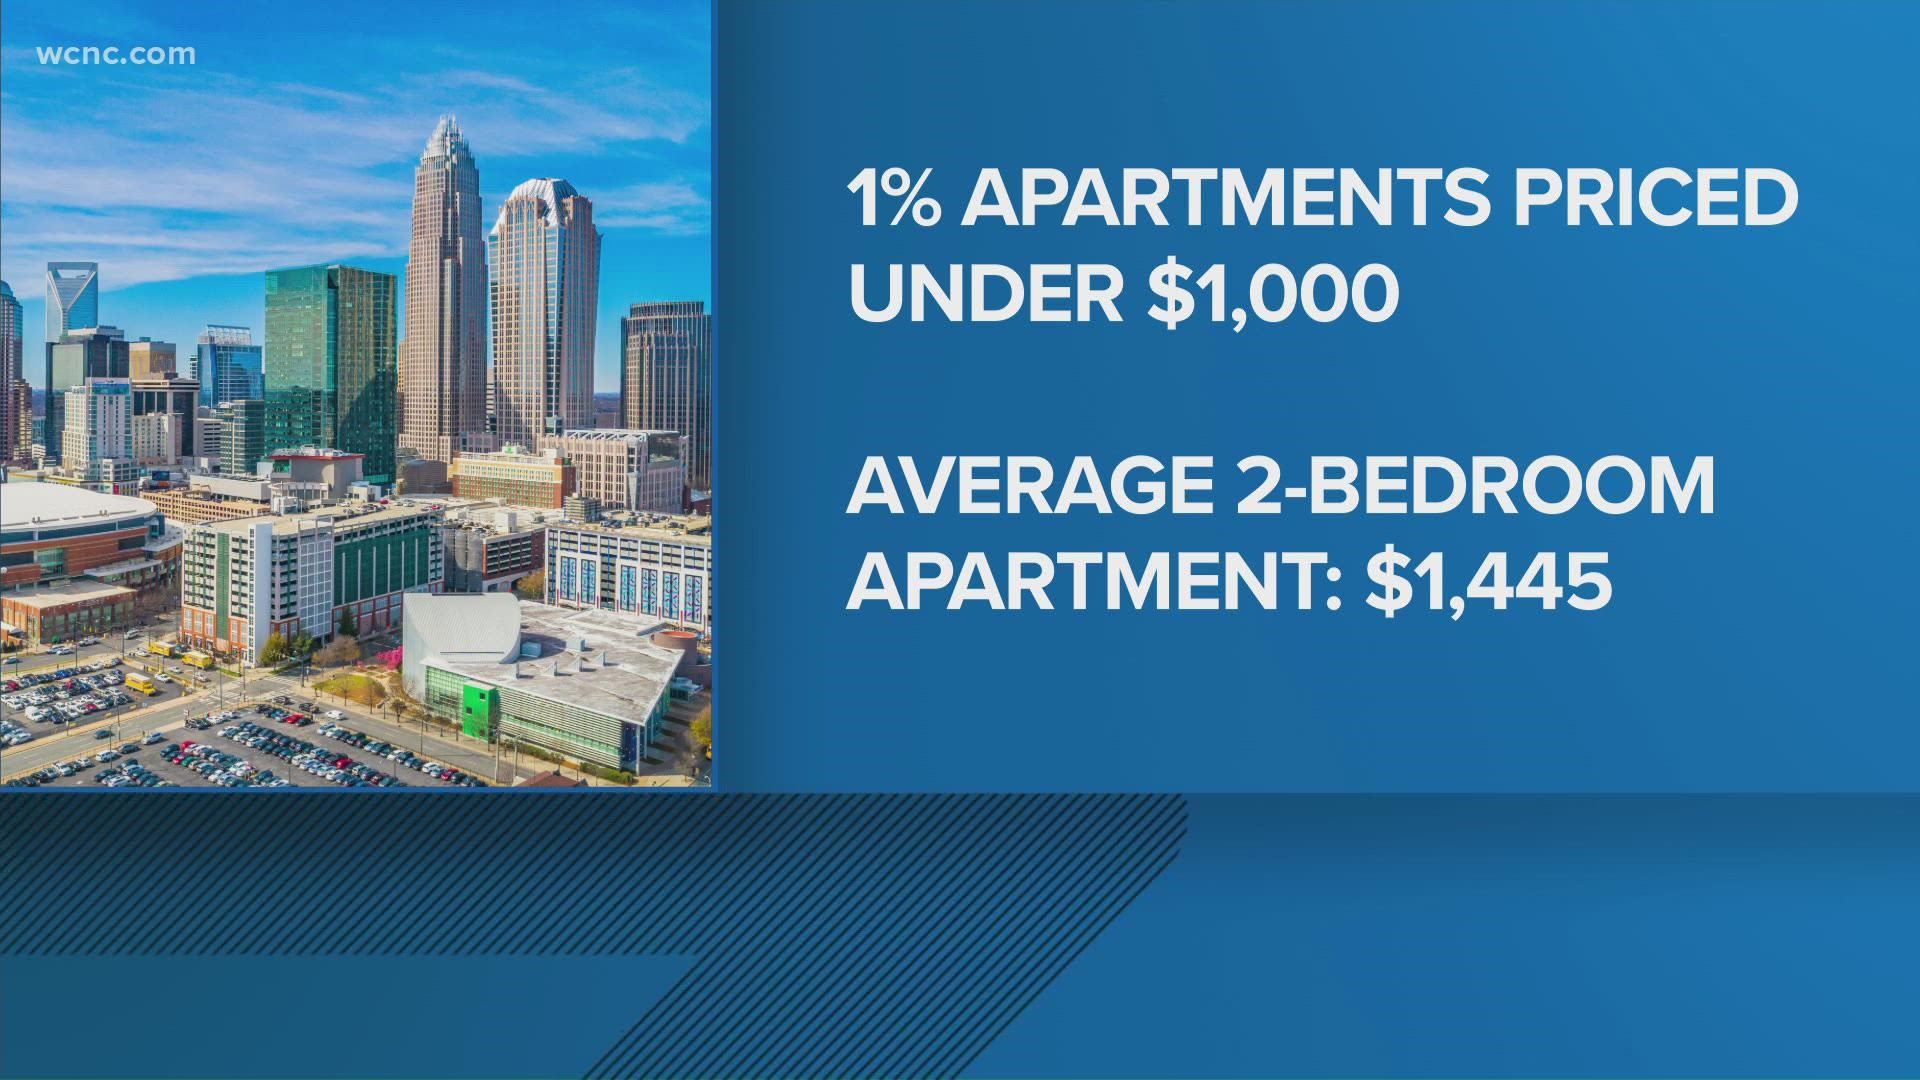 It's no secret: for many, it's hard to buy a house or rent an apartment in Charlotte or Mecklenburg County.